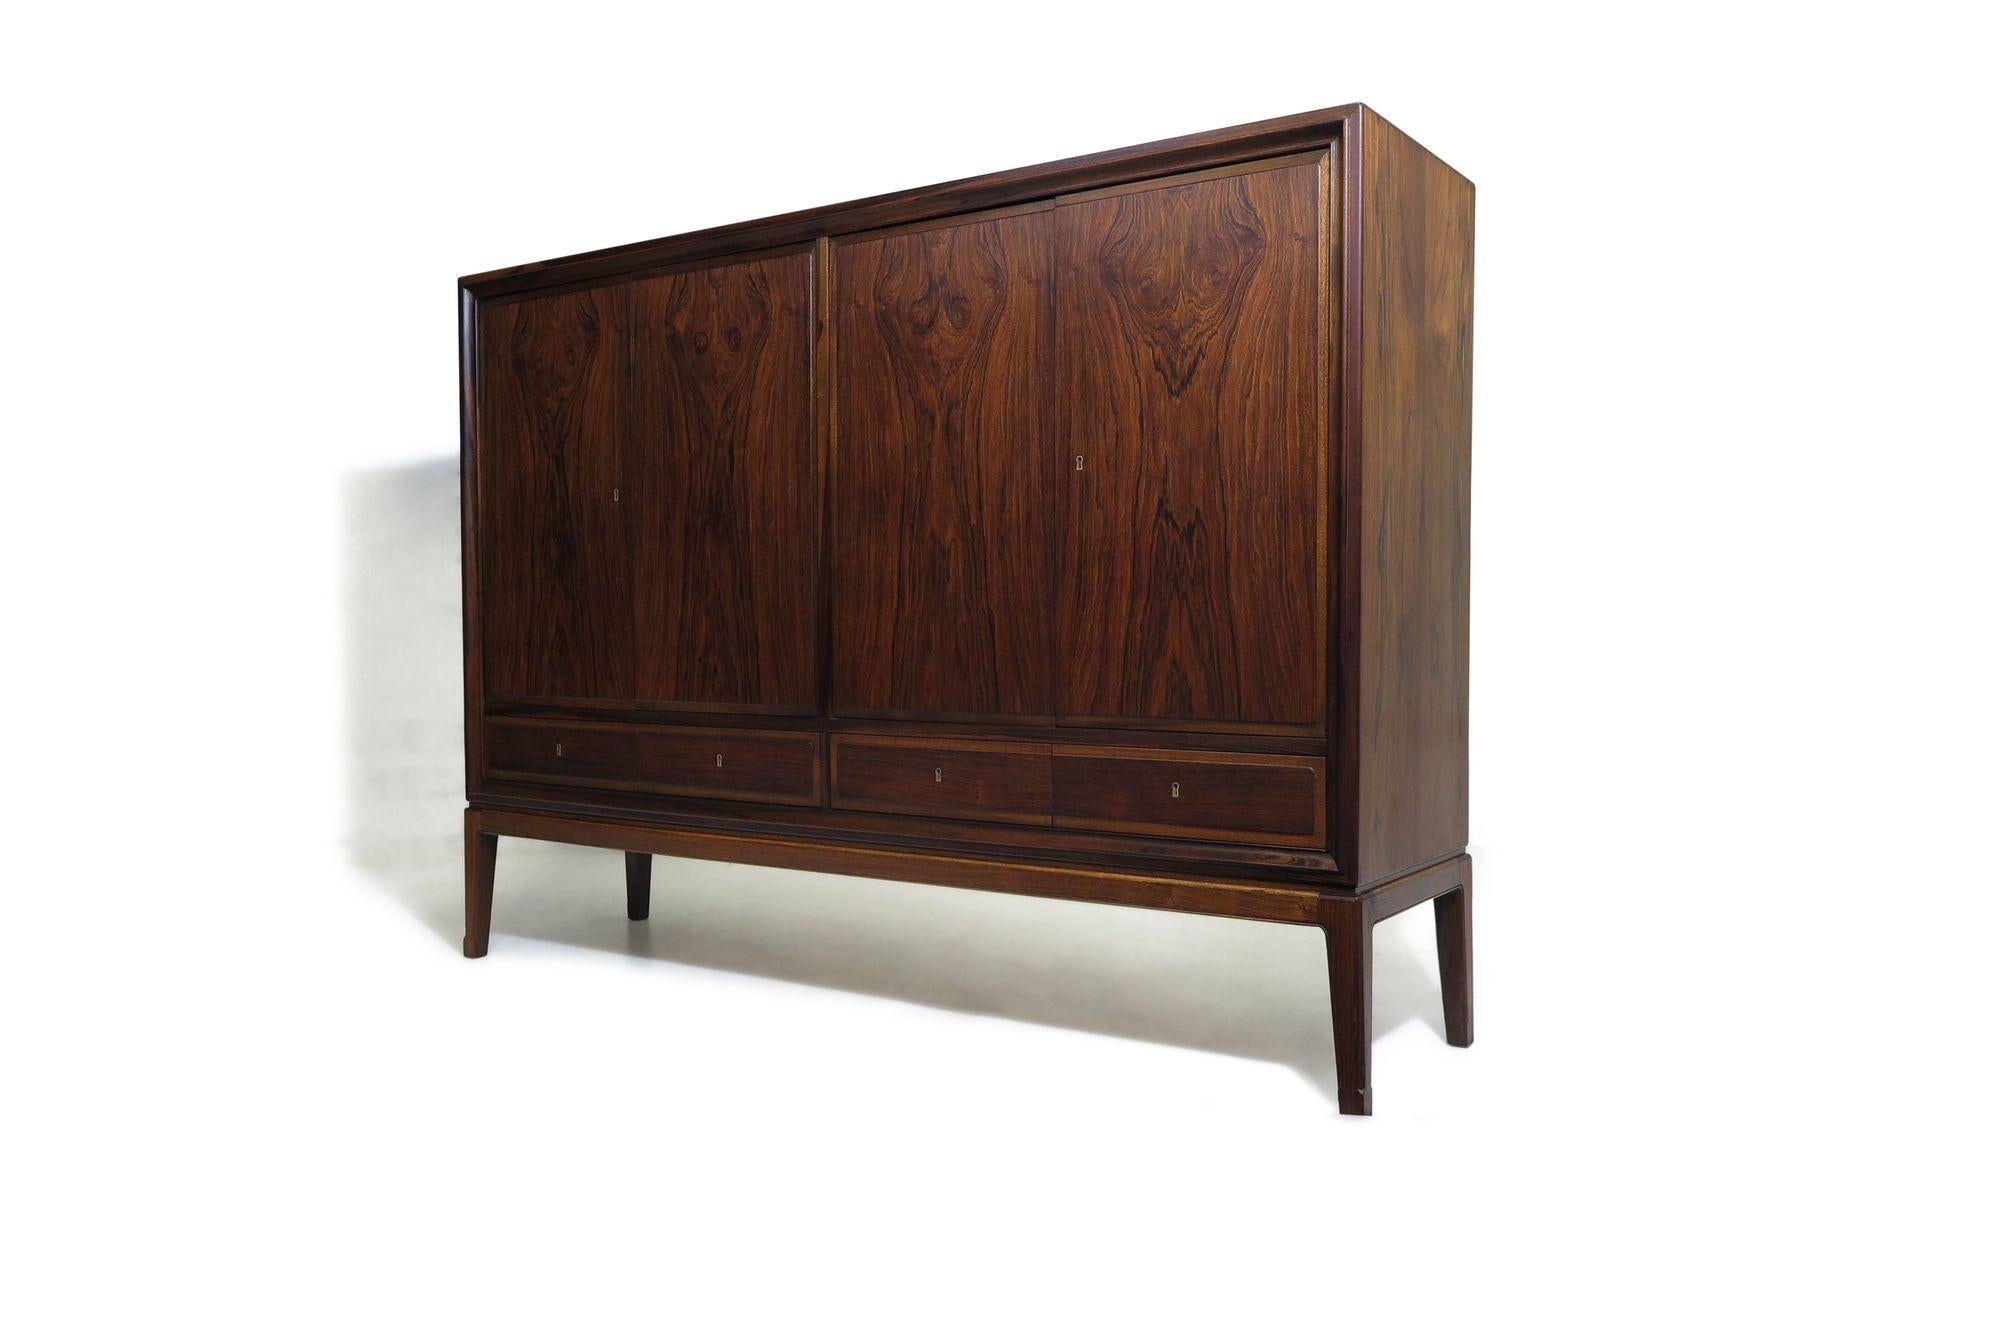 Brazilian Rosewood sideboard designed by Ole Wanscher, 1955: a timeless masterpiece showcasing the unparalleled craftsmanship of midcentury Danish design. Features rich, unfaded, Brazilian rosewood, with book-matched locking doors and drawers. The